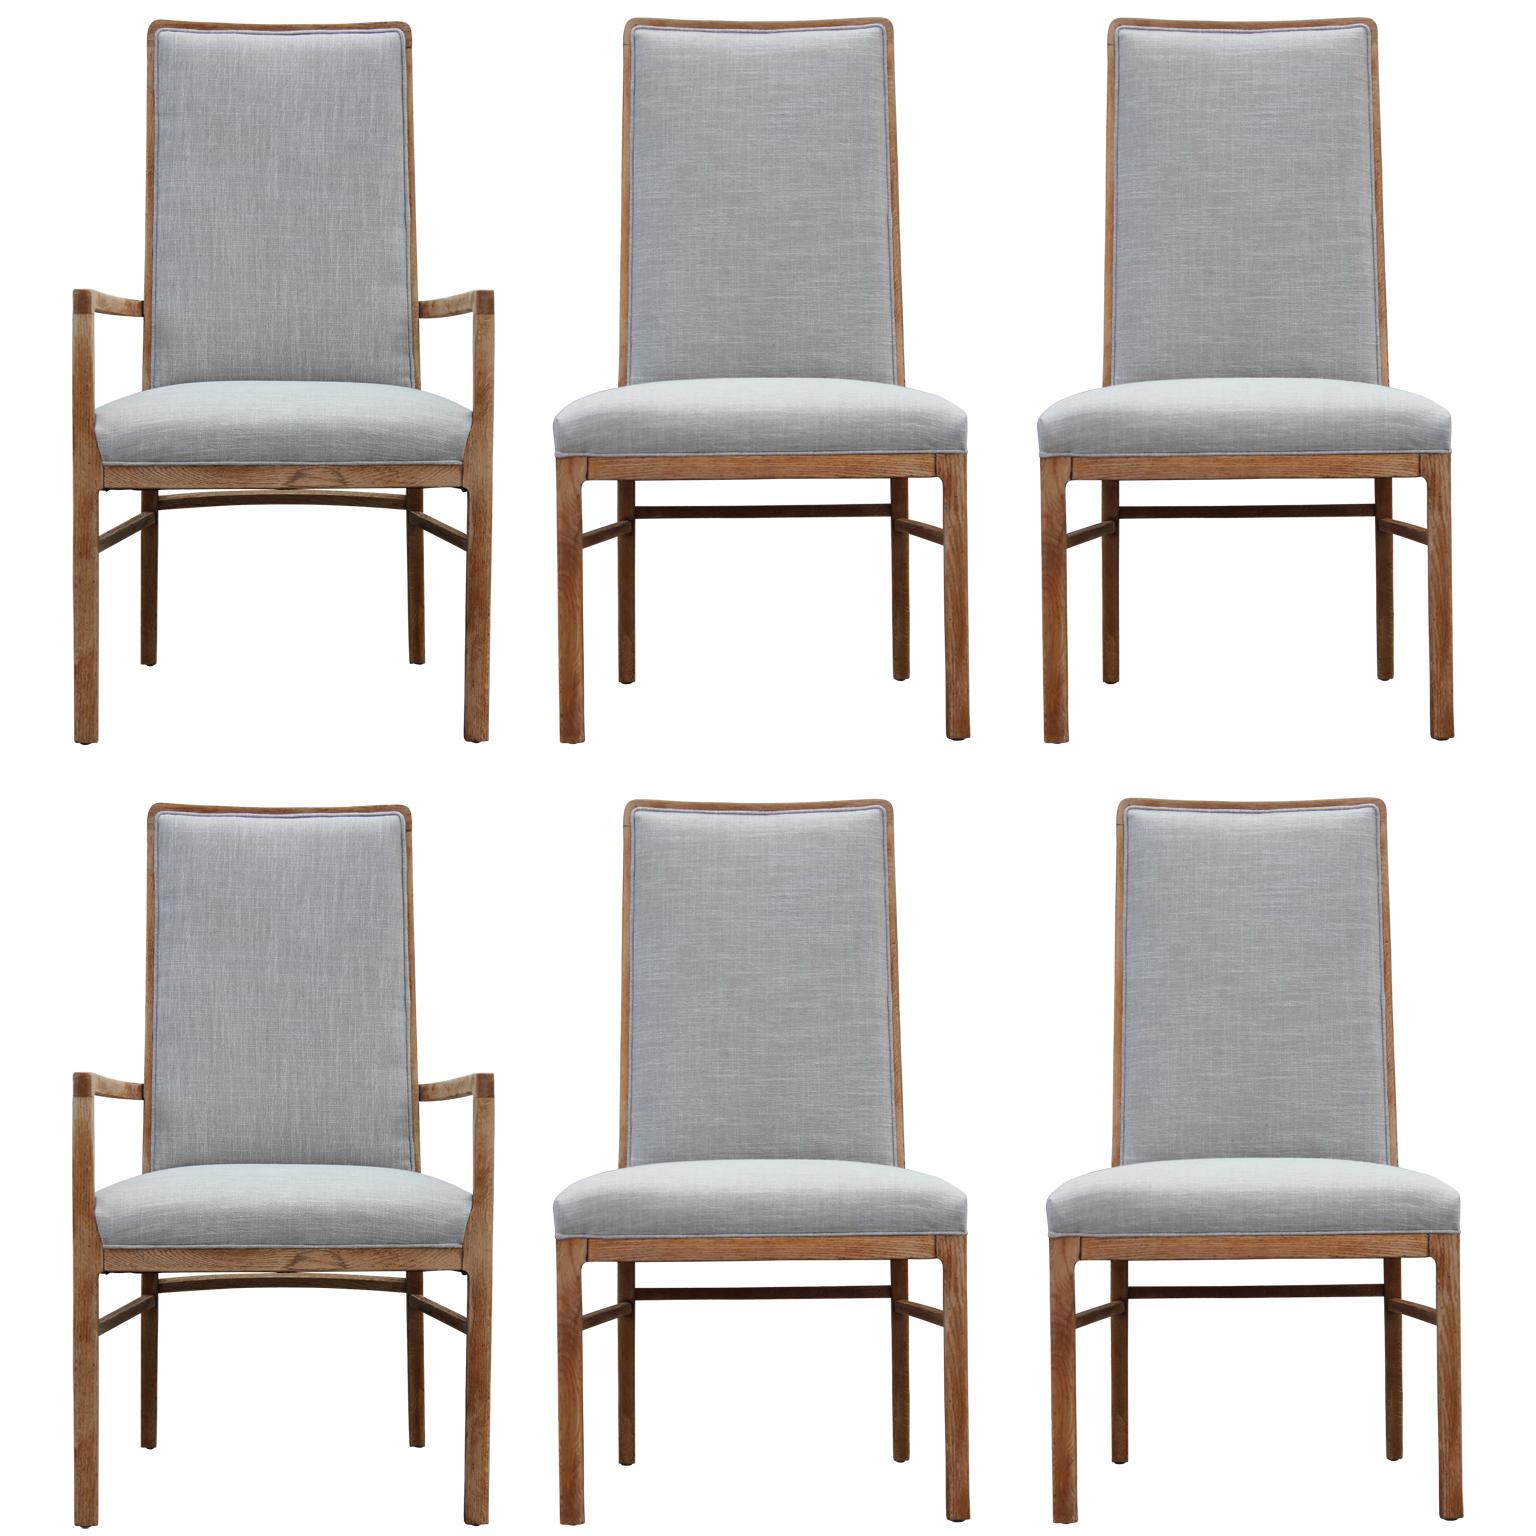 Set of Six Modern Grey Linen Dining Chairs with Bleached Wood Frames